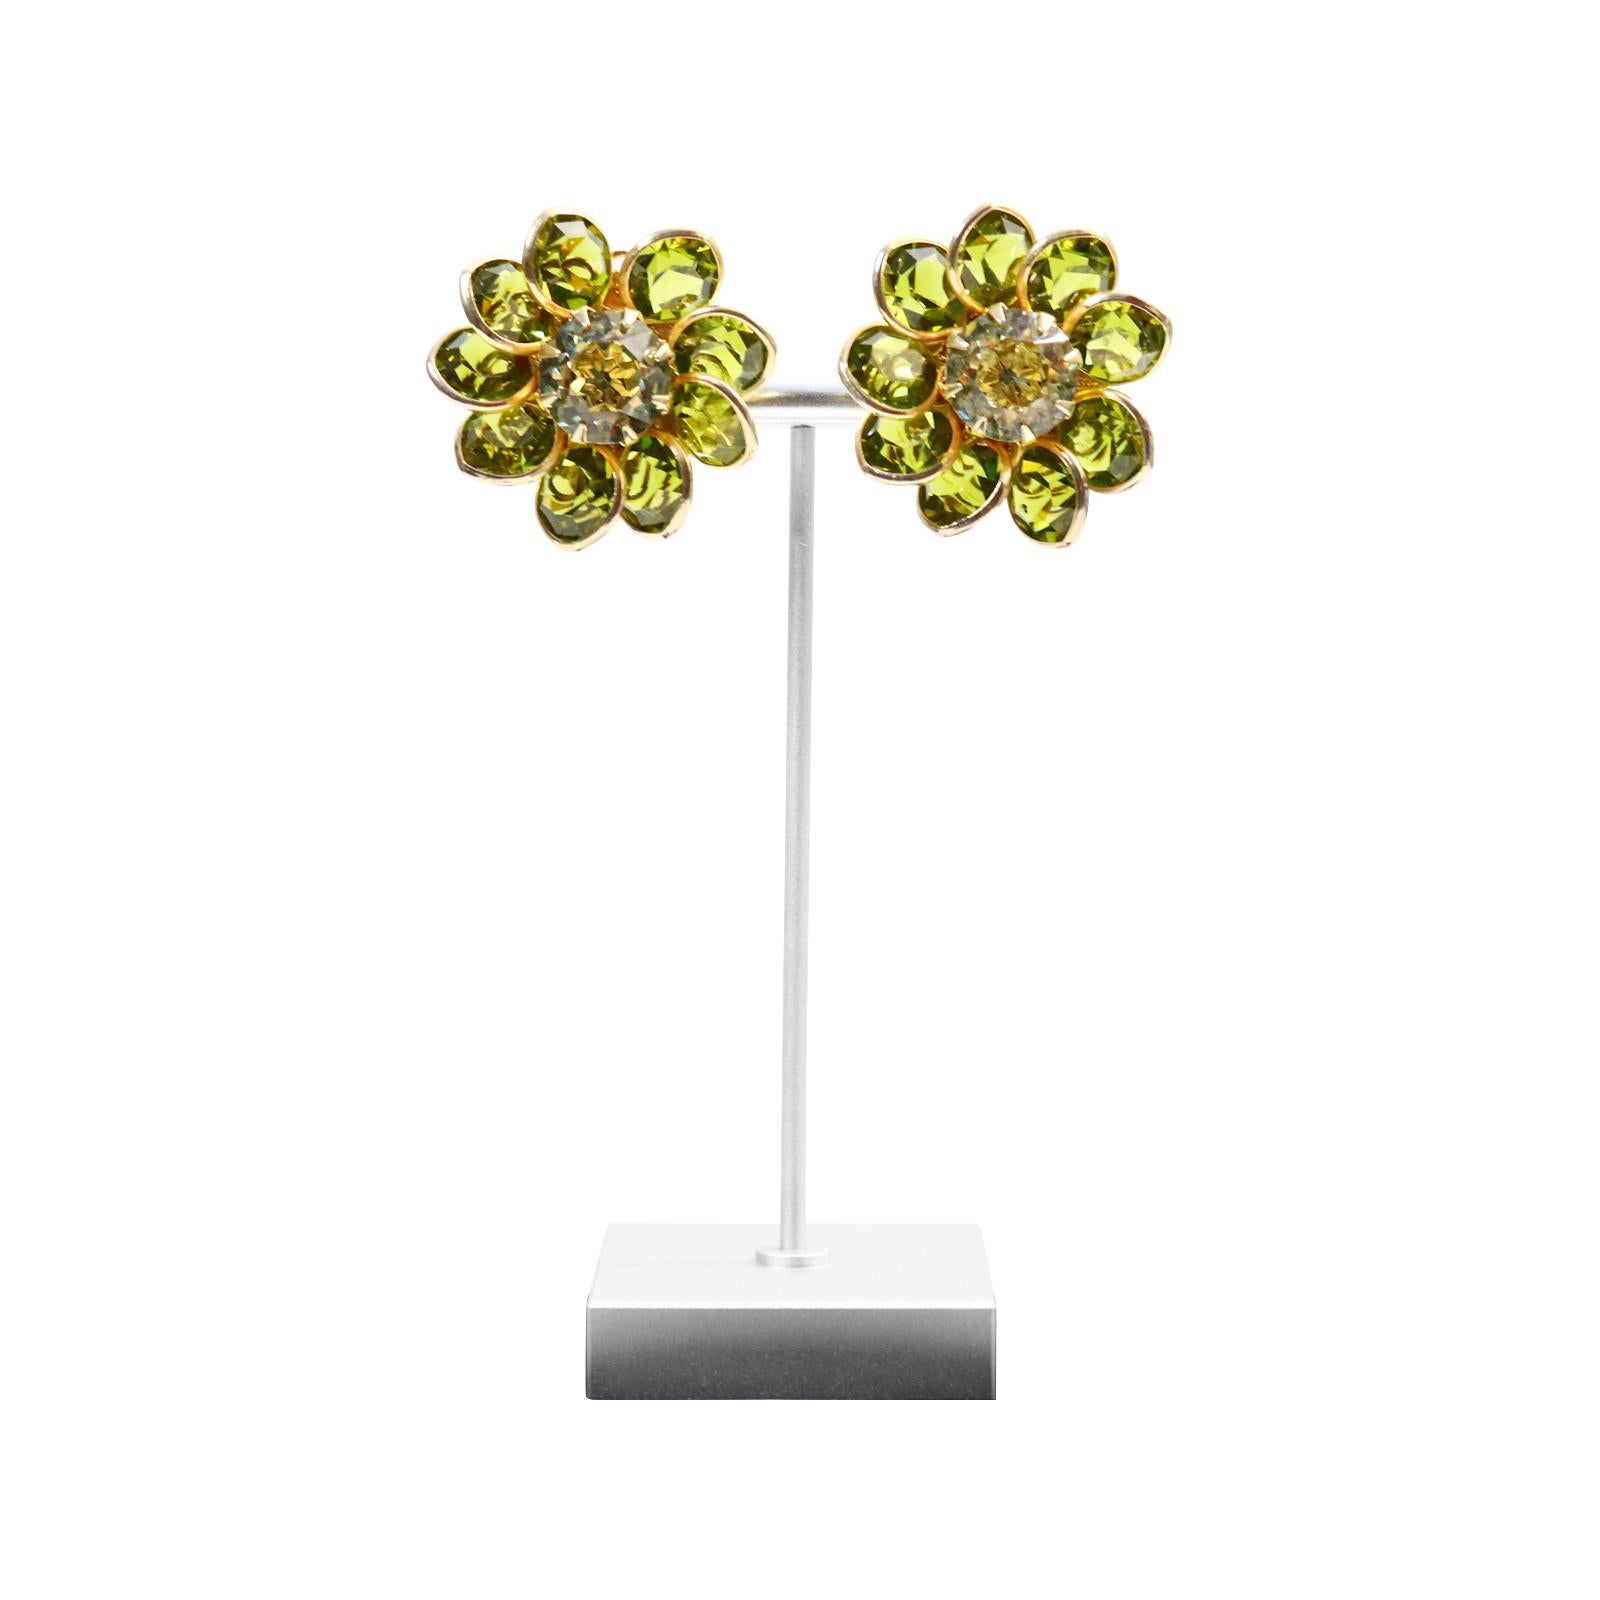 Contemporary Vintage Poured Glass Gold Tone Green With Diamante Flower Earrings Circa 1960s For Sale